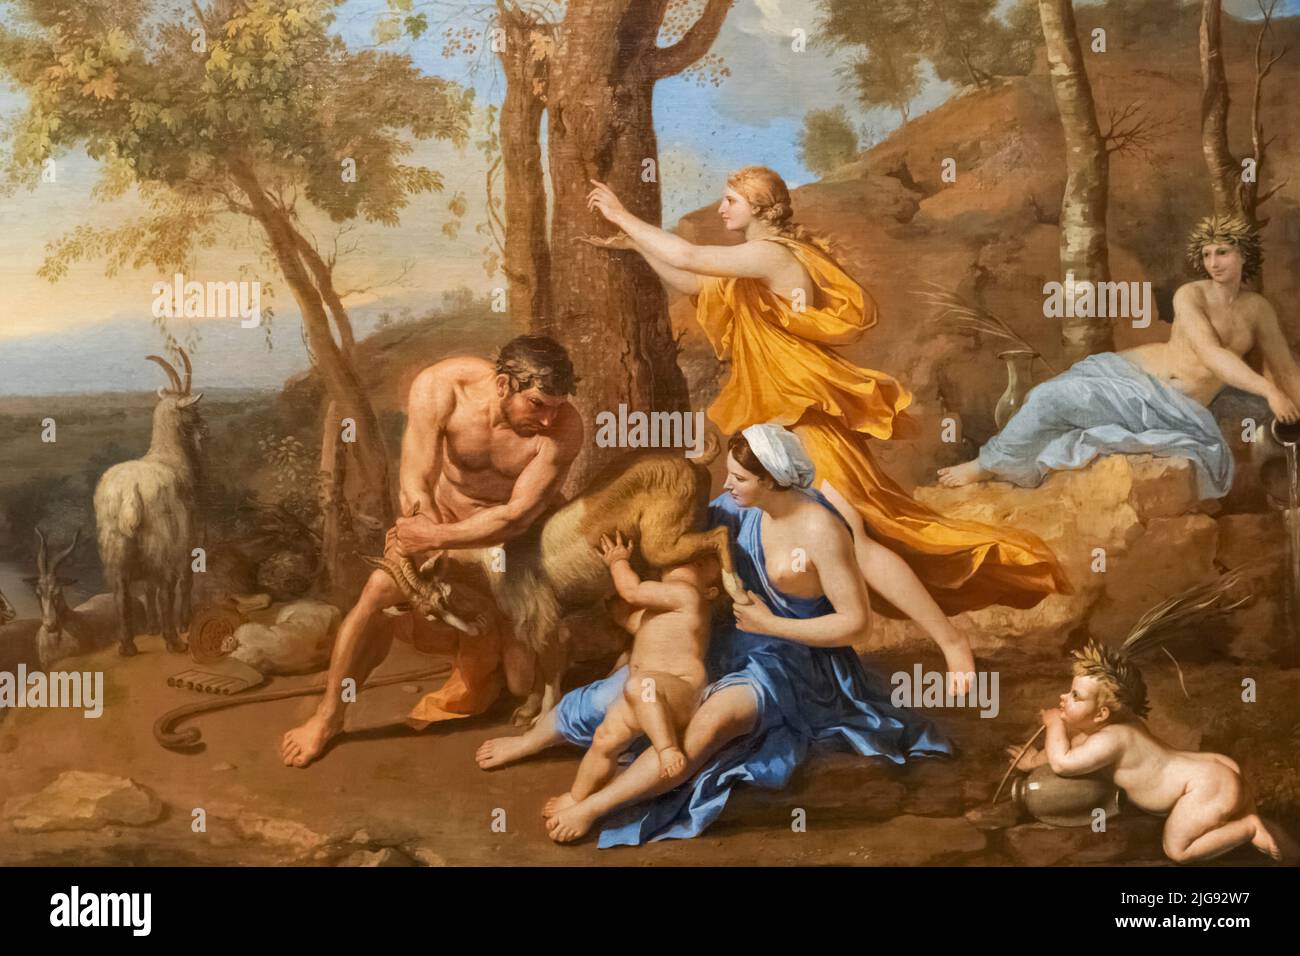 Painting titled 'The Nurture of Jupiter' by Nicolas Poussin dated 1636 Stock Photo